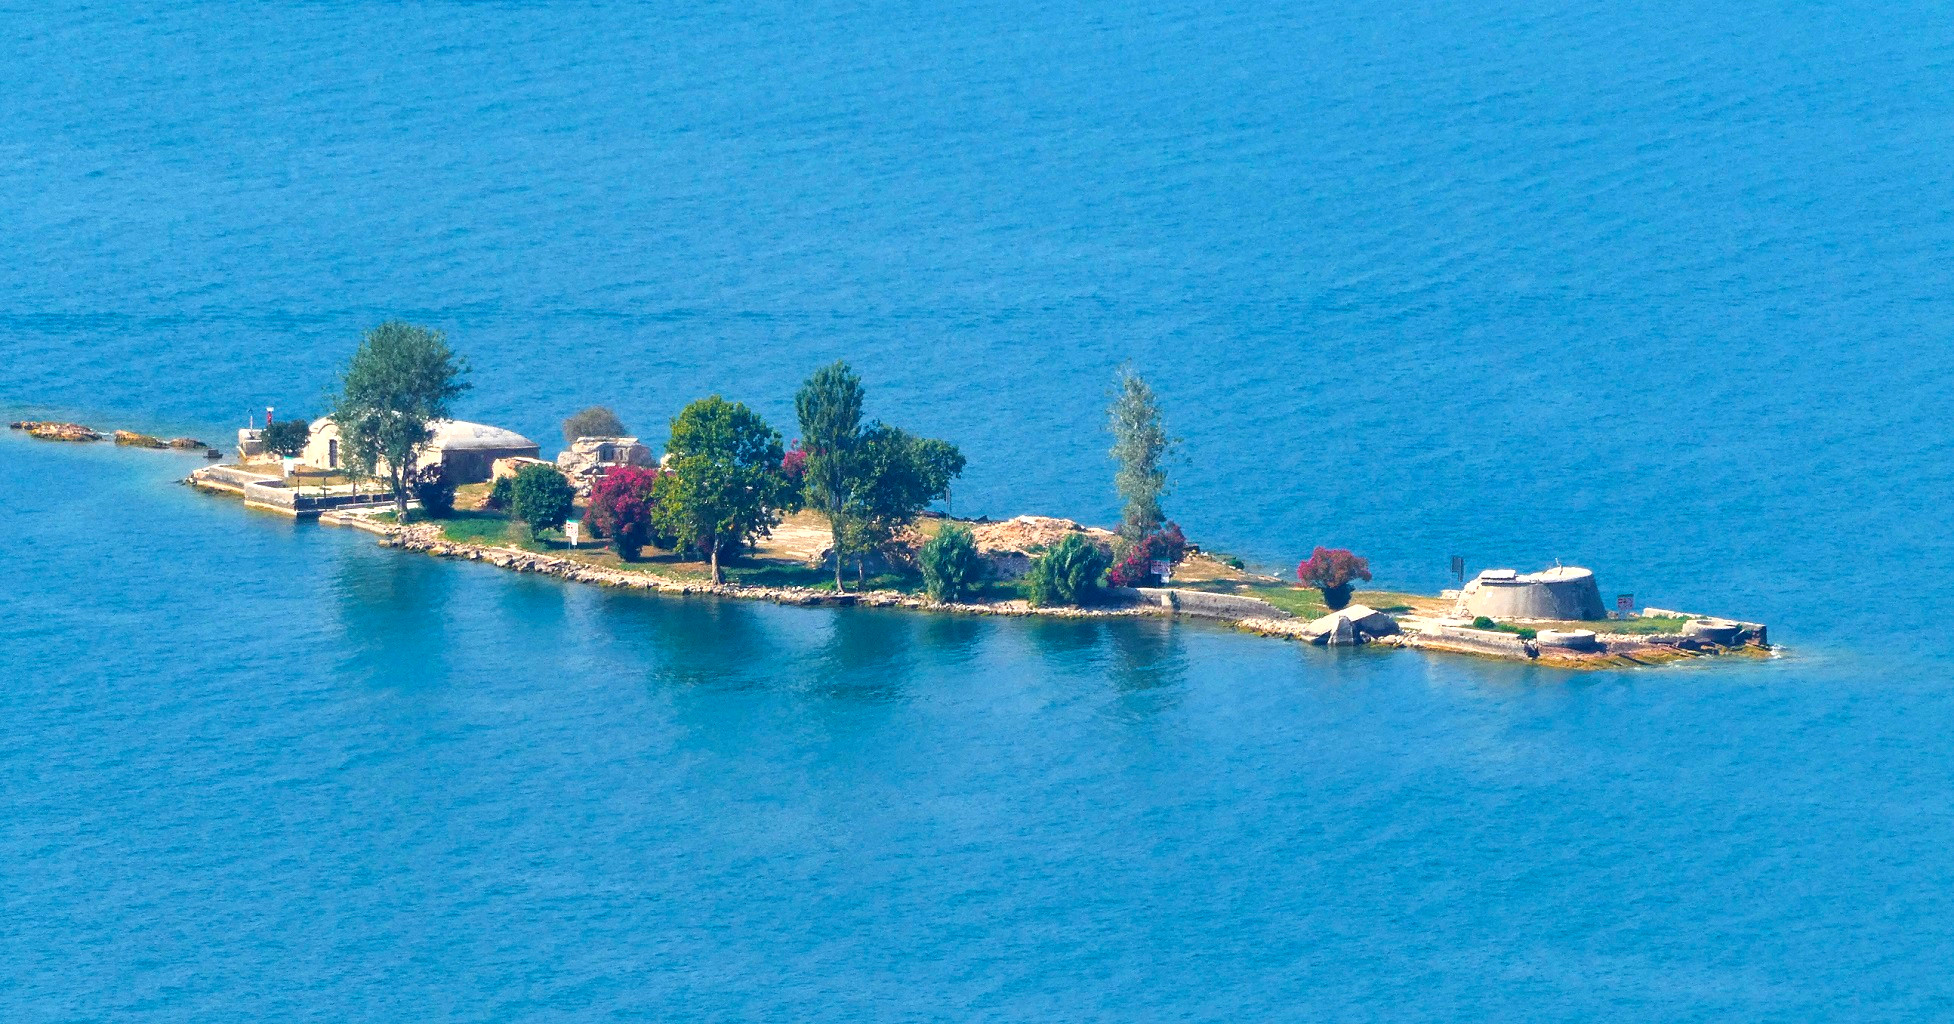 The small island of Trimelone